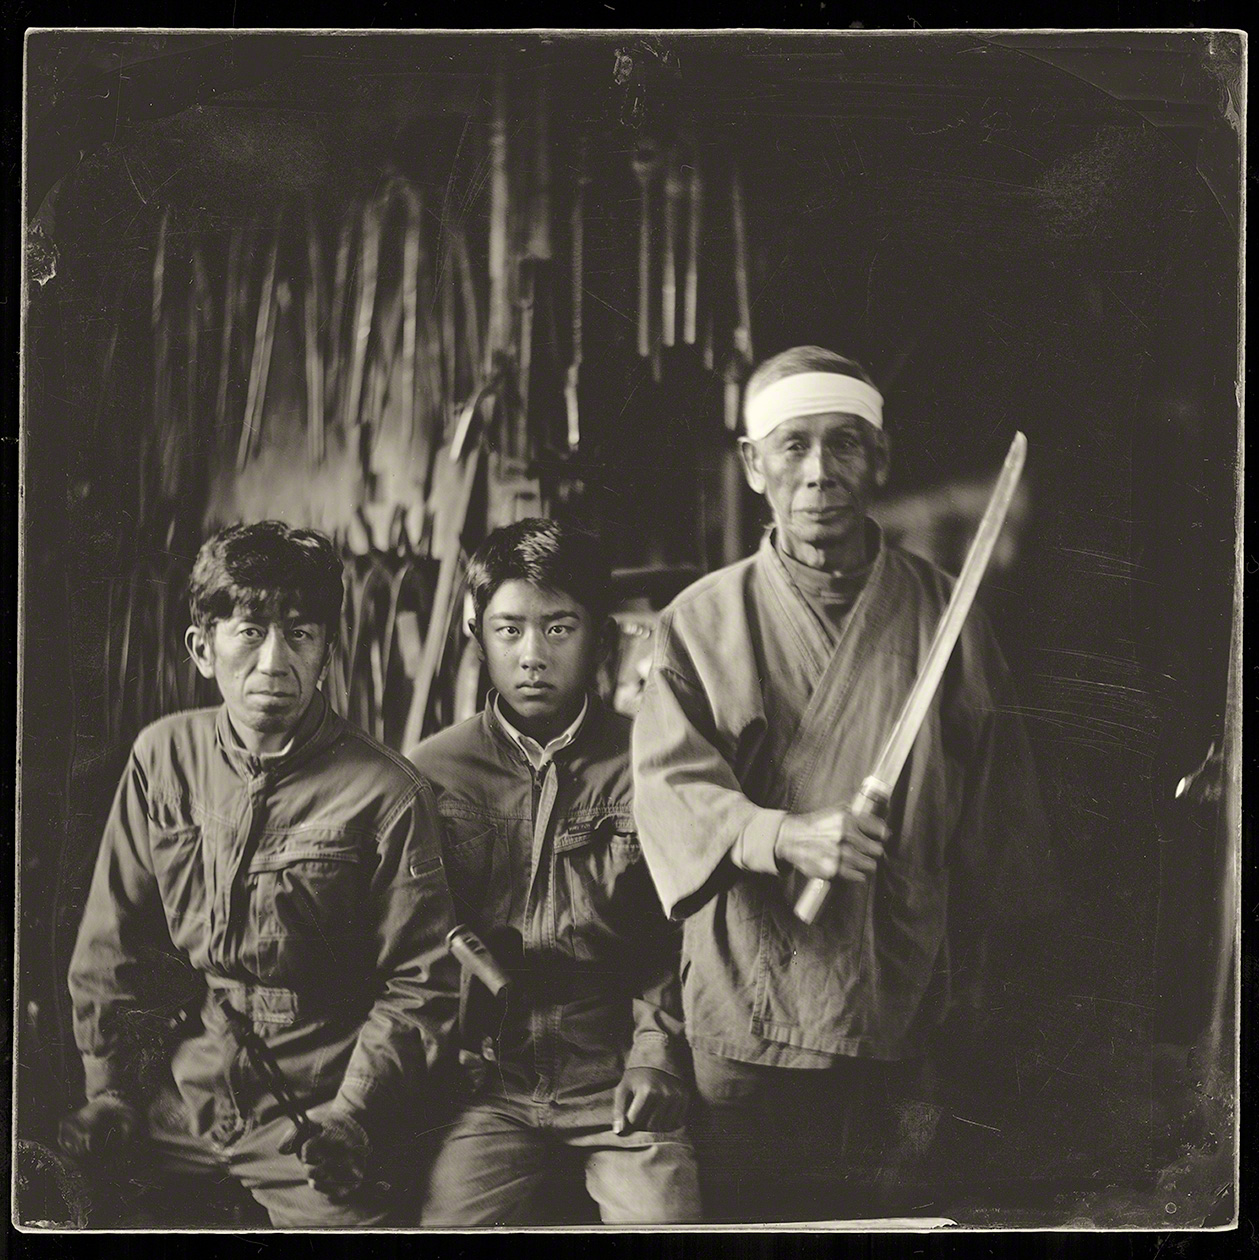 Three generations of blacksmiths in the nearby city of Yasugi. The region is renowned for iron smelting and fine sword craftsmanship.